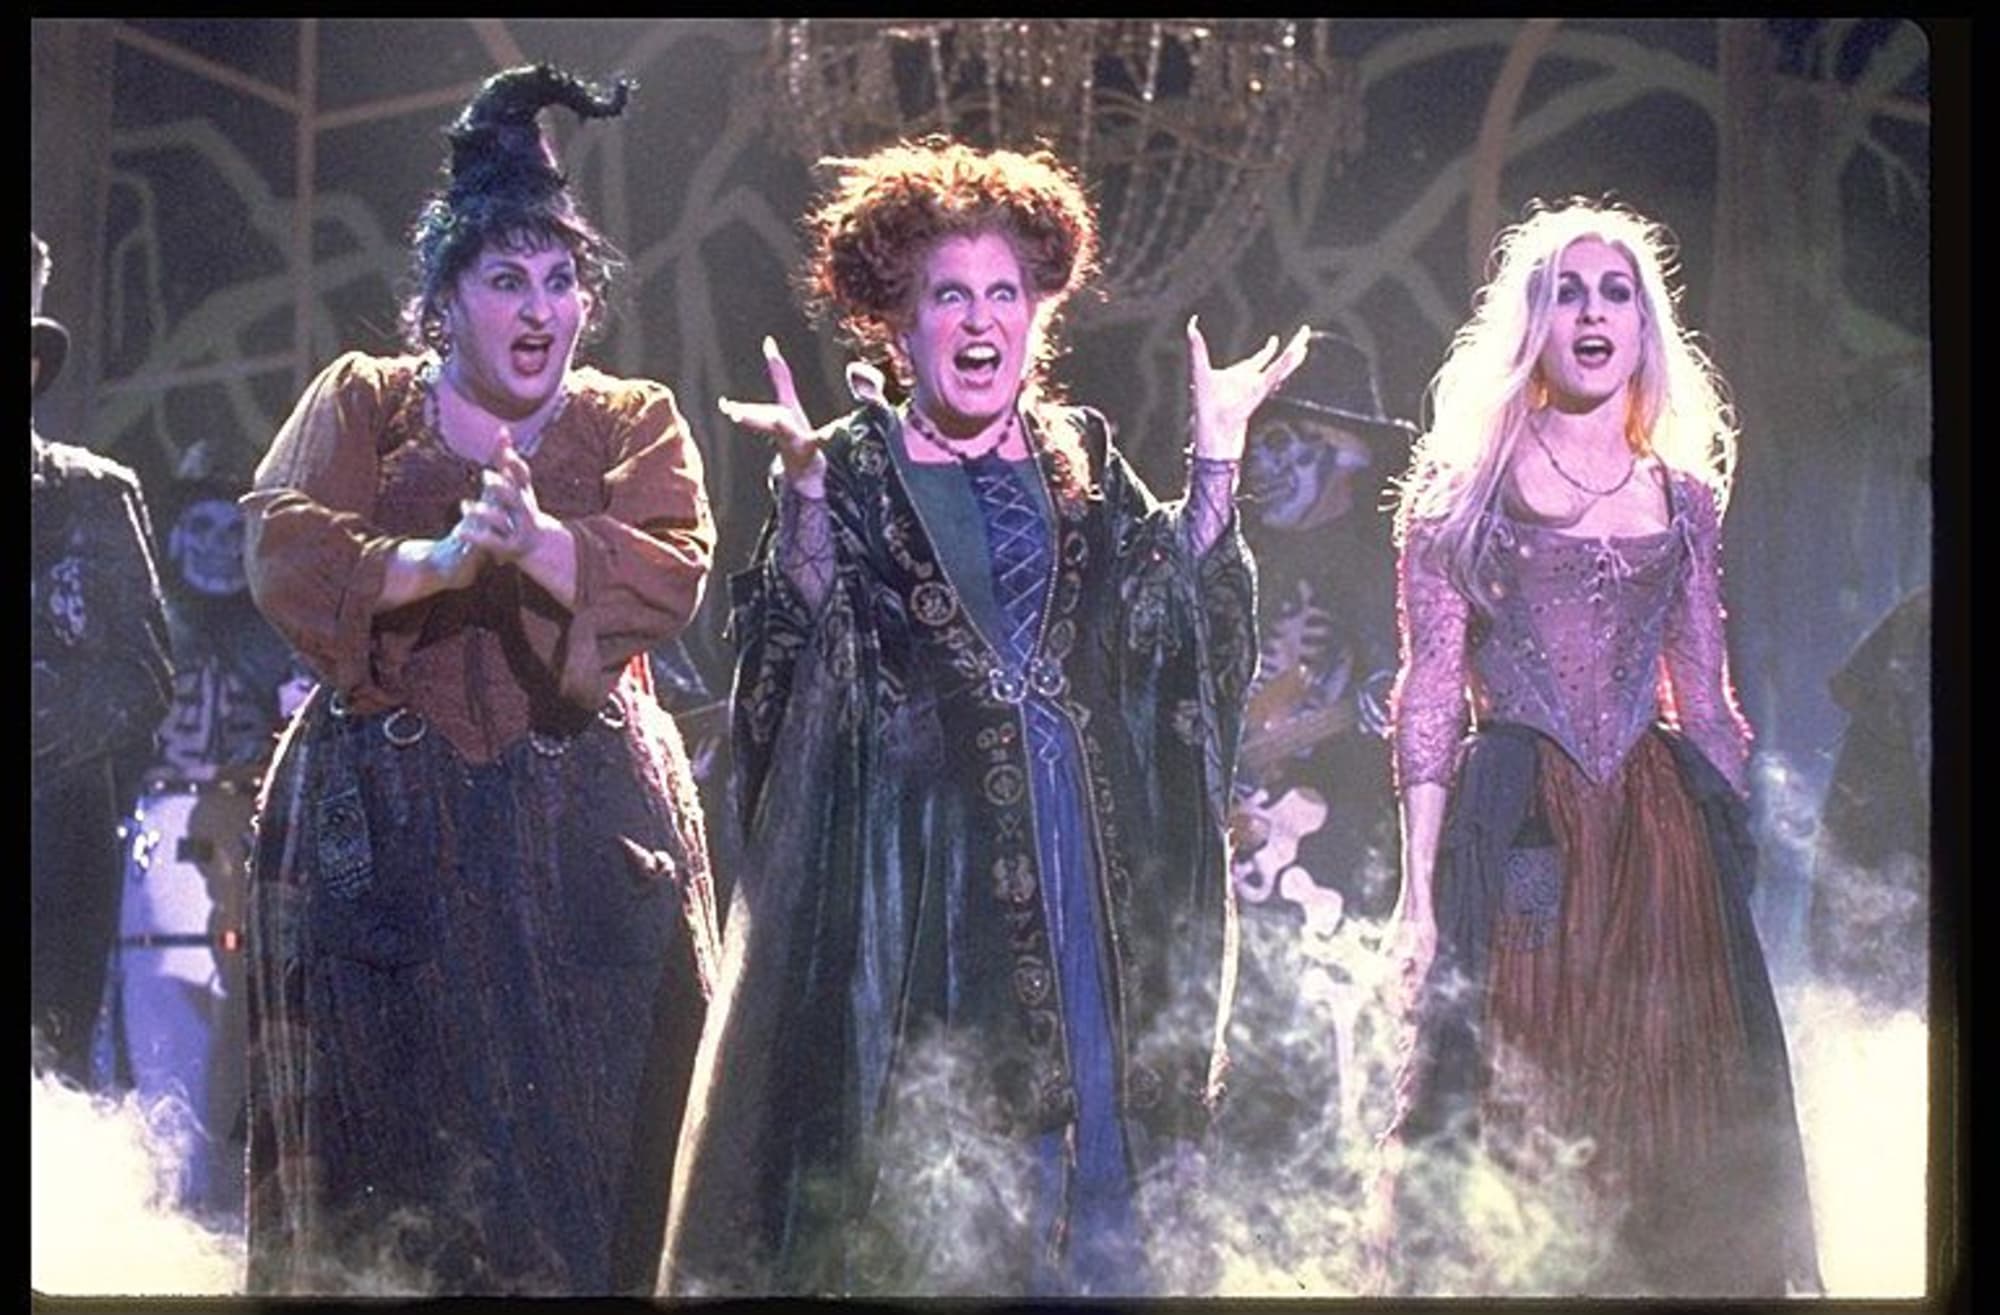 Here’s the FULL Hocus Pocus schedule for Freeform’s 31 Nights of Halloween